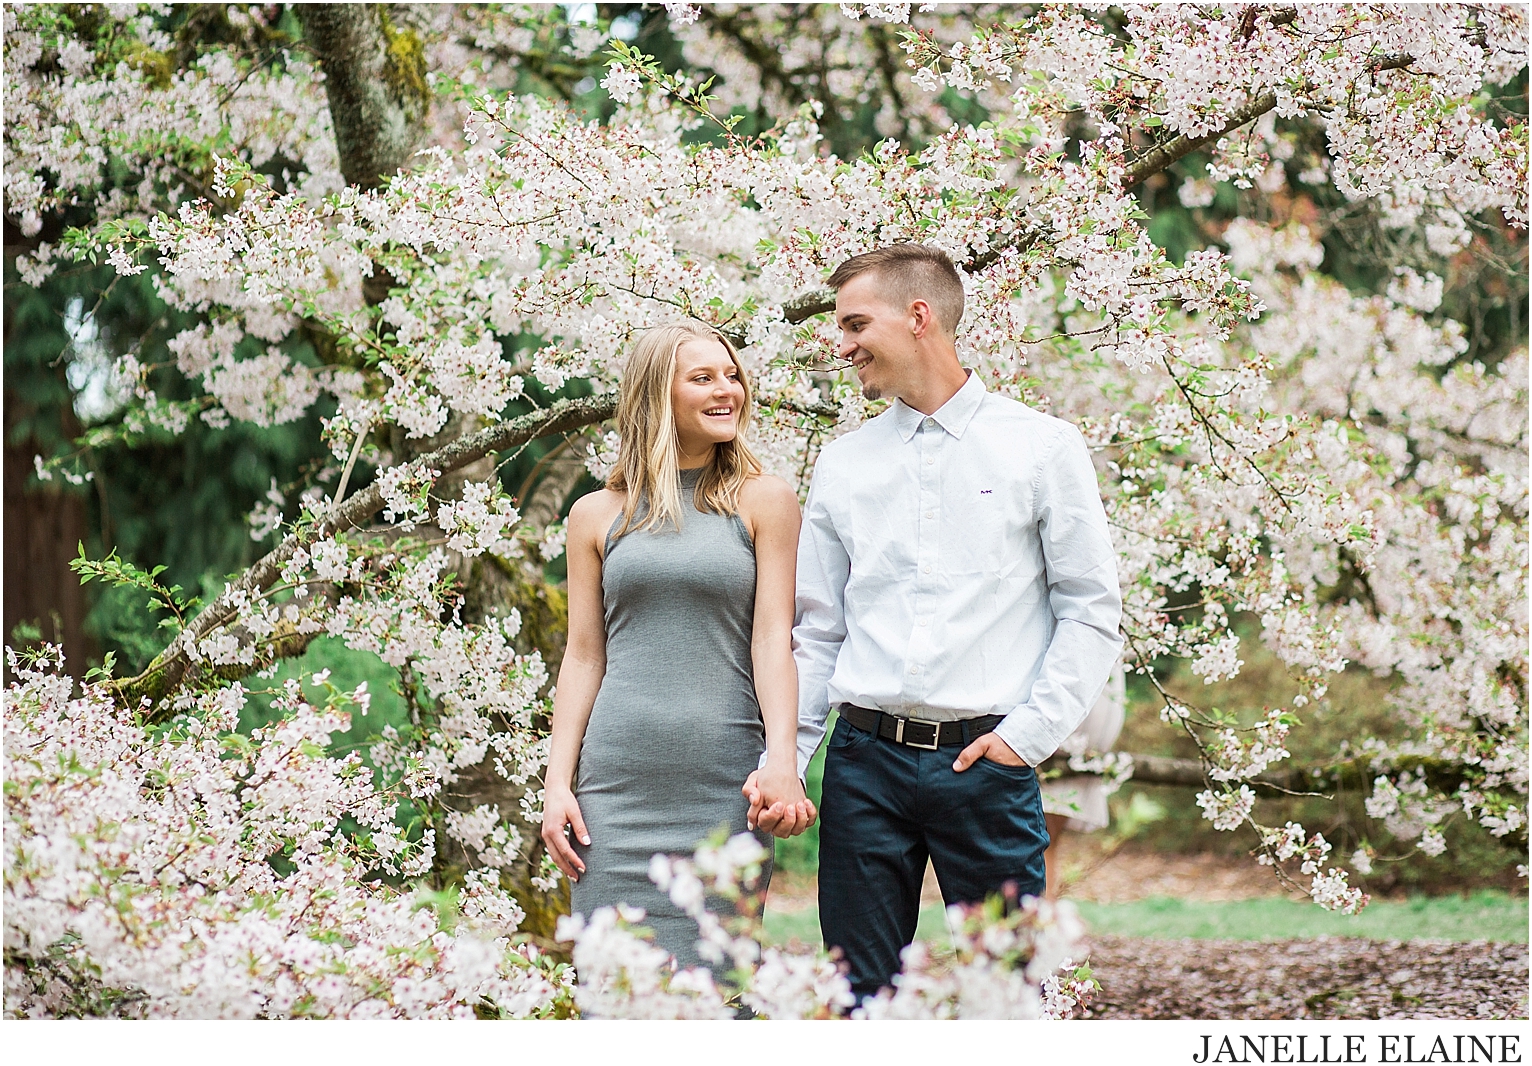 tricia and nate engagement photos-janelle elaine photography-138.jpg